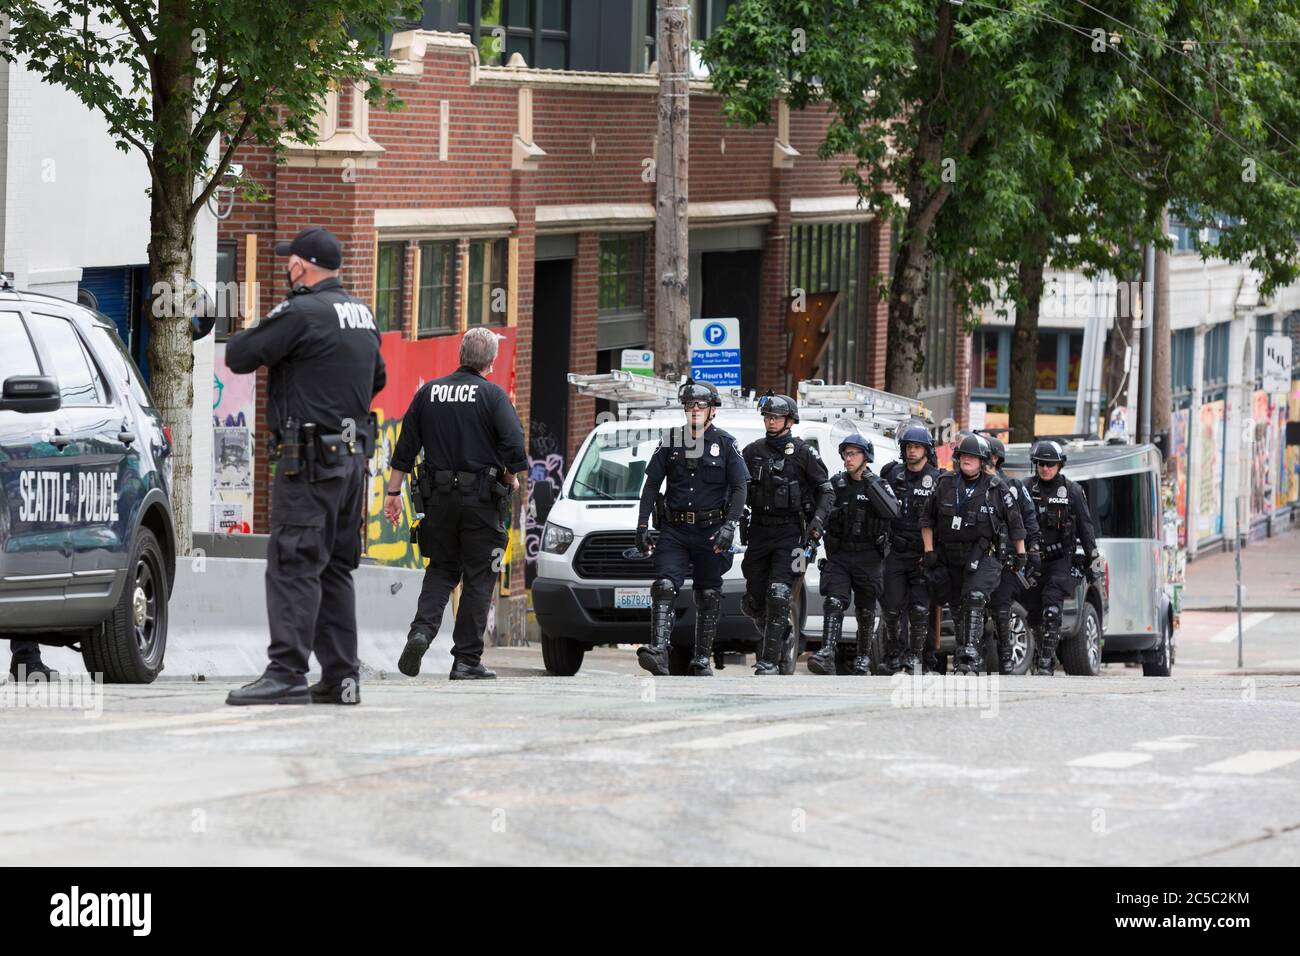 Washington DC, USA. 1st July 2020. Police officers in riot gear arrive at the closed East Precinct after clearing the 'Capitol Hill Occupied Protest' zone in Seattle on Wednesday, July 1, 2020. The zone, an occupation protest and self-declared autonomous zone, was established on June 8, 2020 when the Seattle Police Department closed the East Precinct after days of protests in the wake of the death of George Floyd while in Minneapolis police custody Credit: Paul Christian Gordon/Alamy Live News Stock Photo